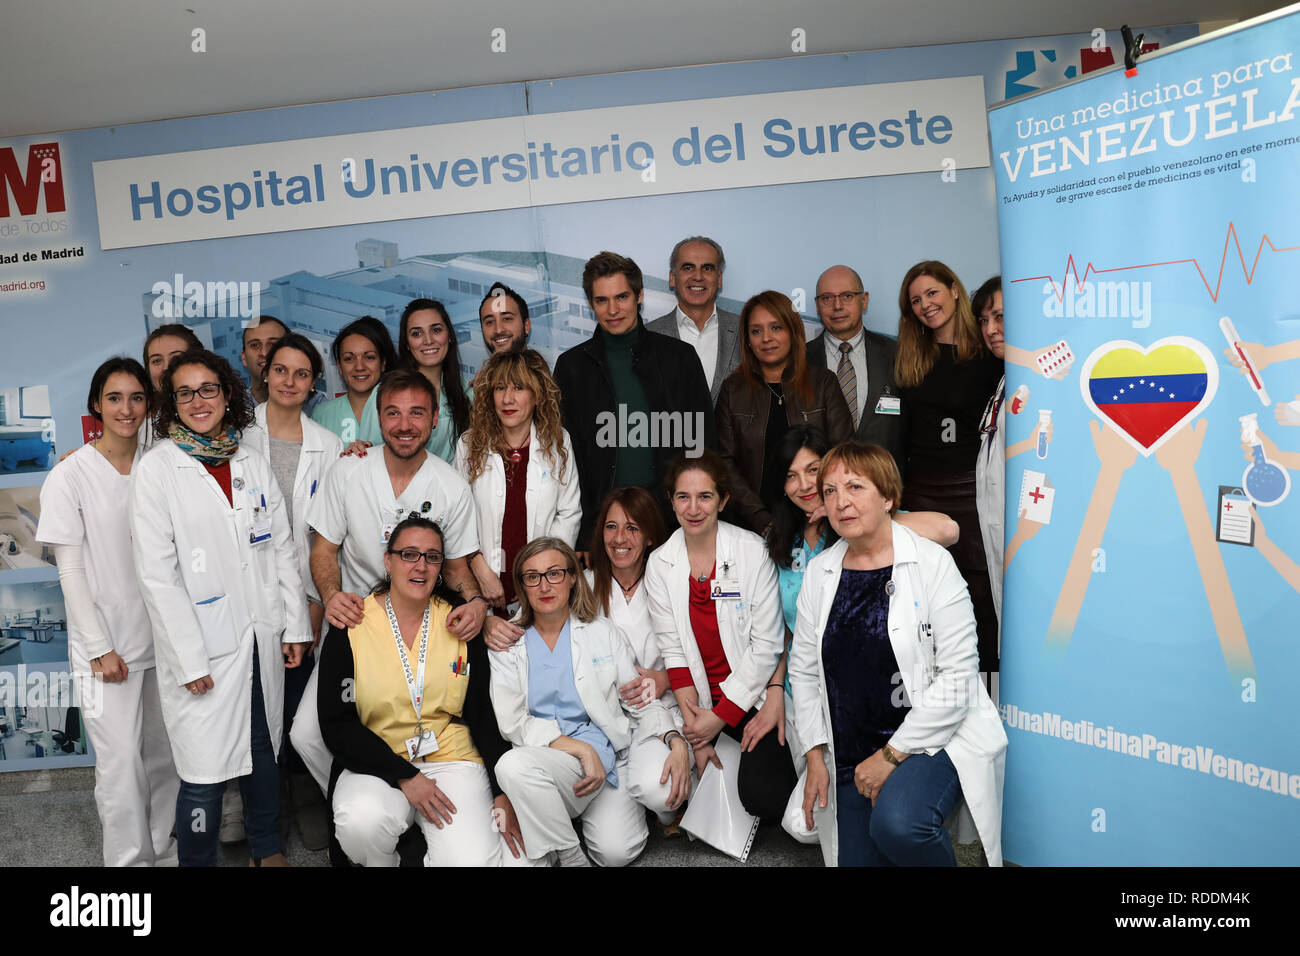 Madrid, Spain. 18th Jan, 2019. Hopital volunteer team that has helped to get the material donated to Venezuela. The Councilor for Health of the Community of Madrid, Enrique Ruiz Escudero, accompanied by the ambassador of the NGO 'A medicine for Venezuela', the Venezuelan singer Carlos Baute, and the director of the Association, Vanessa Pineda, assist in the donation of sanitary material performed by the University Hospital of the Sureste to the aforementioned organization. Credit: Jesus Hellin/ZUMA Wire/Alamy Live News Stock Photo